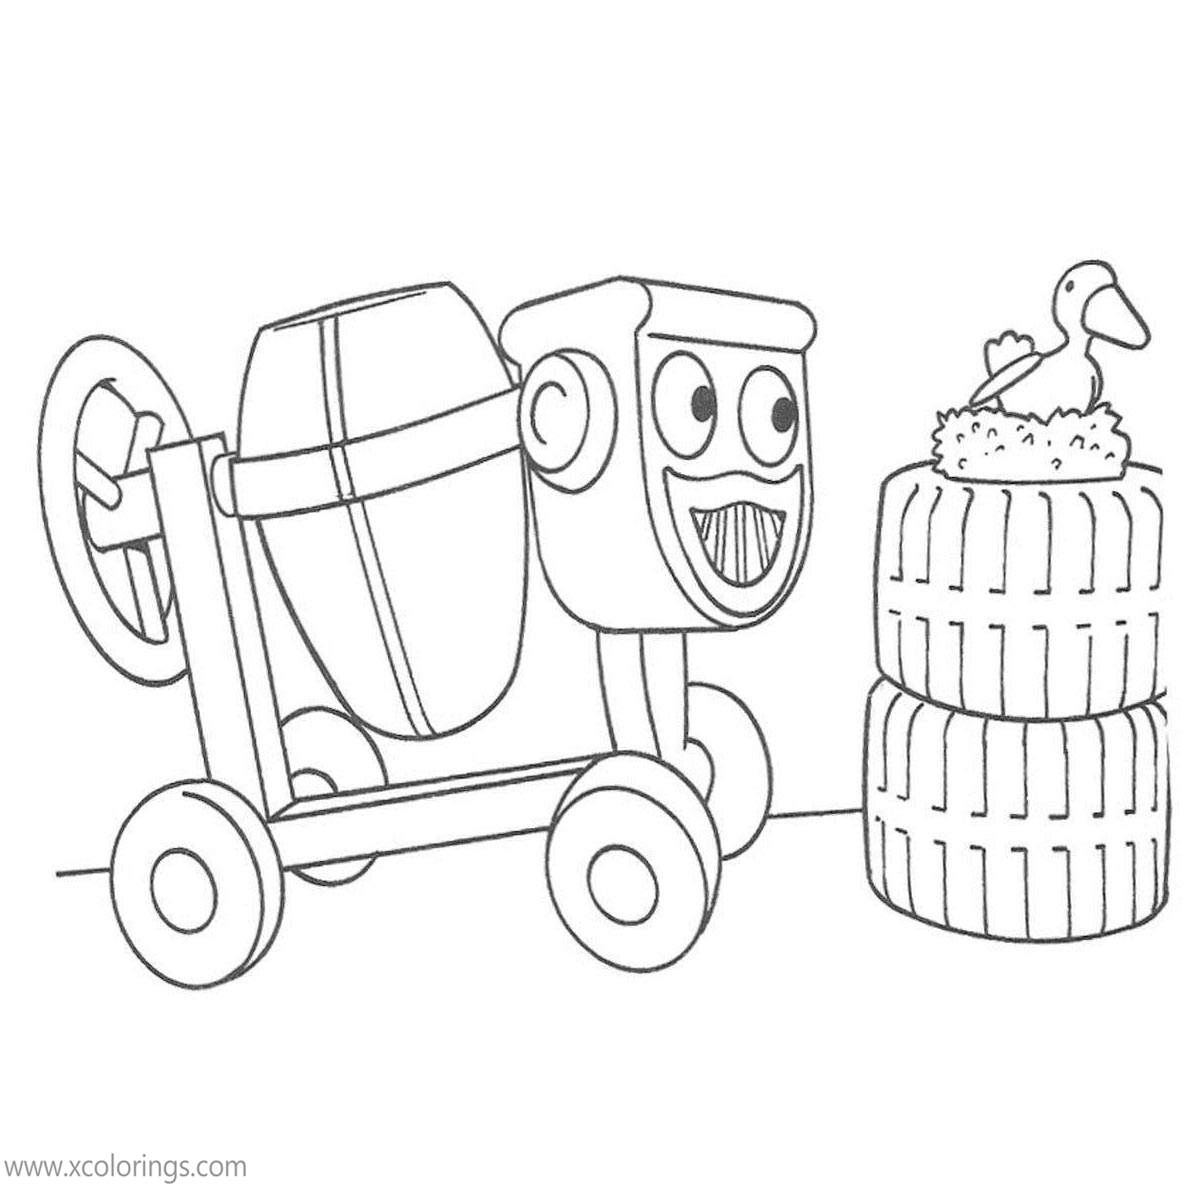 Free Bob The Builder Coloring Pages Dizzy and Birds printable